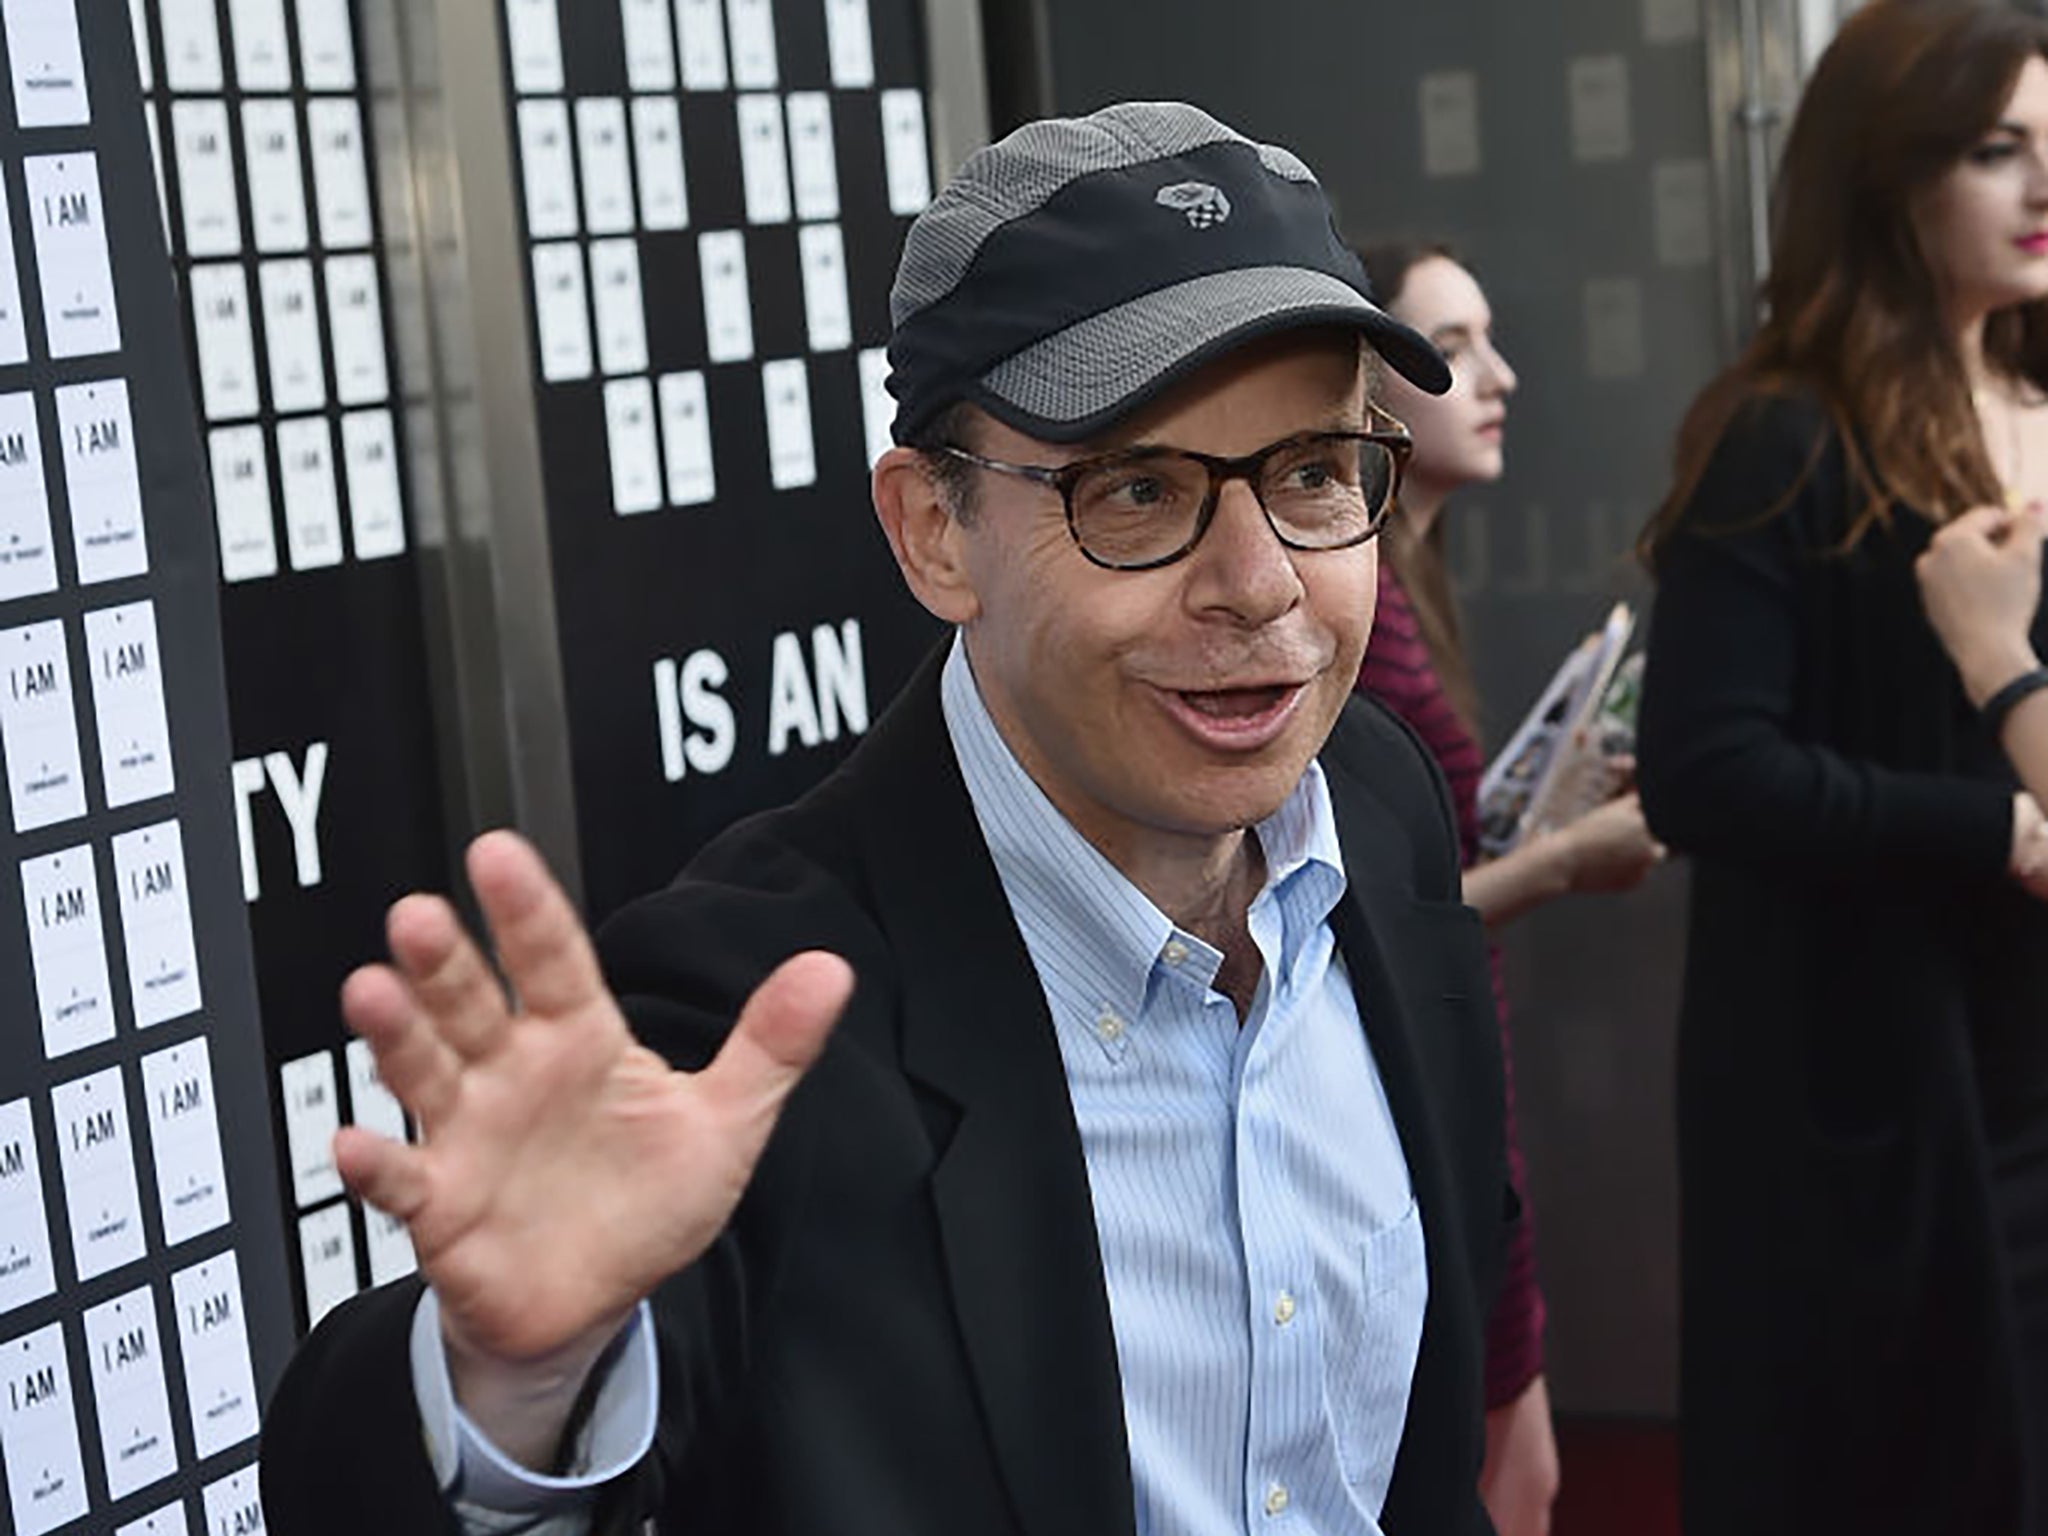 Rick Moranis attends an event in 2017